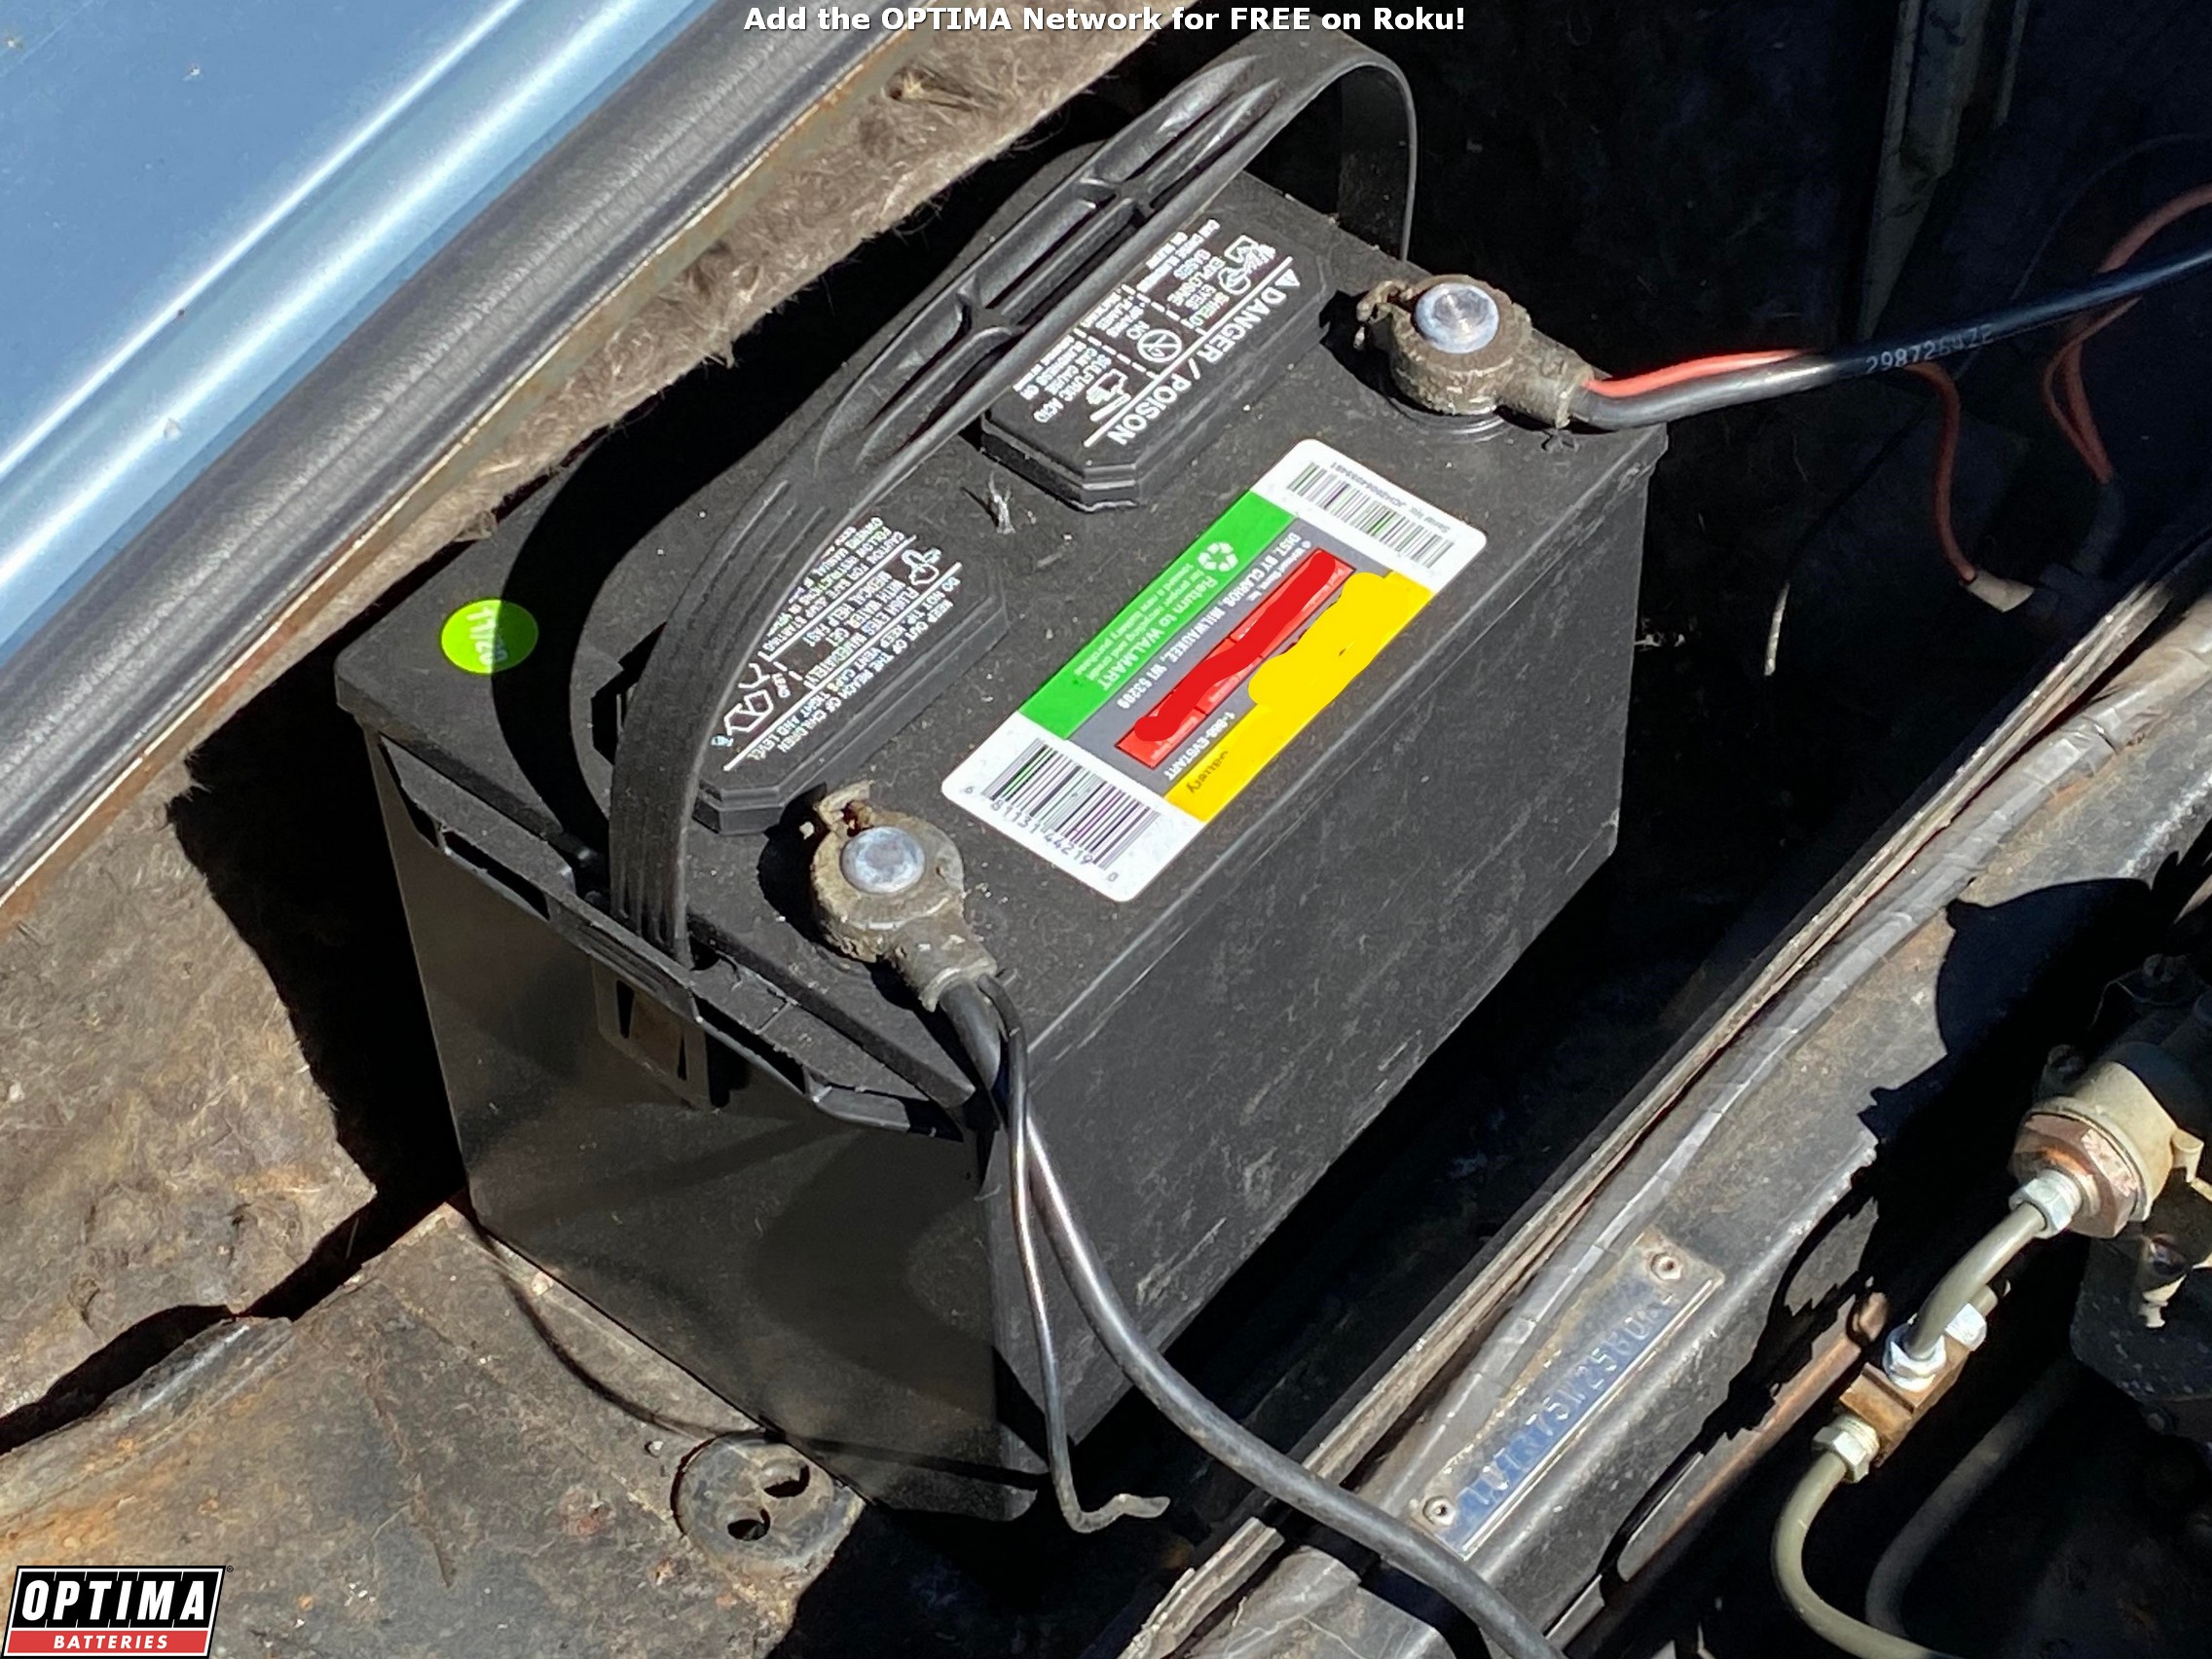 https://www.optimabatteries.com/images/default-source/experience/why-is-it-important-to-secure-a-car-battery-jpg.jpg?sfvrsn=e2b15f0c_0